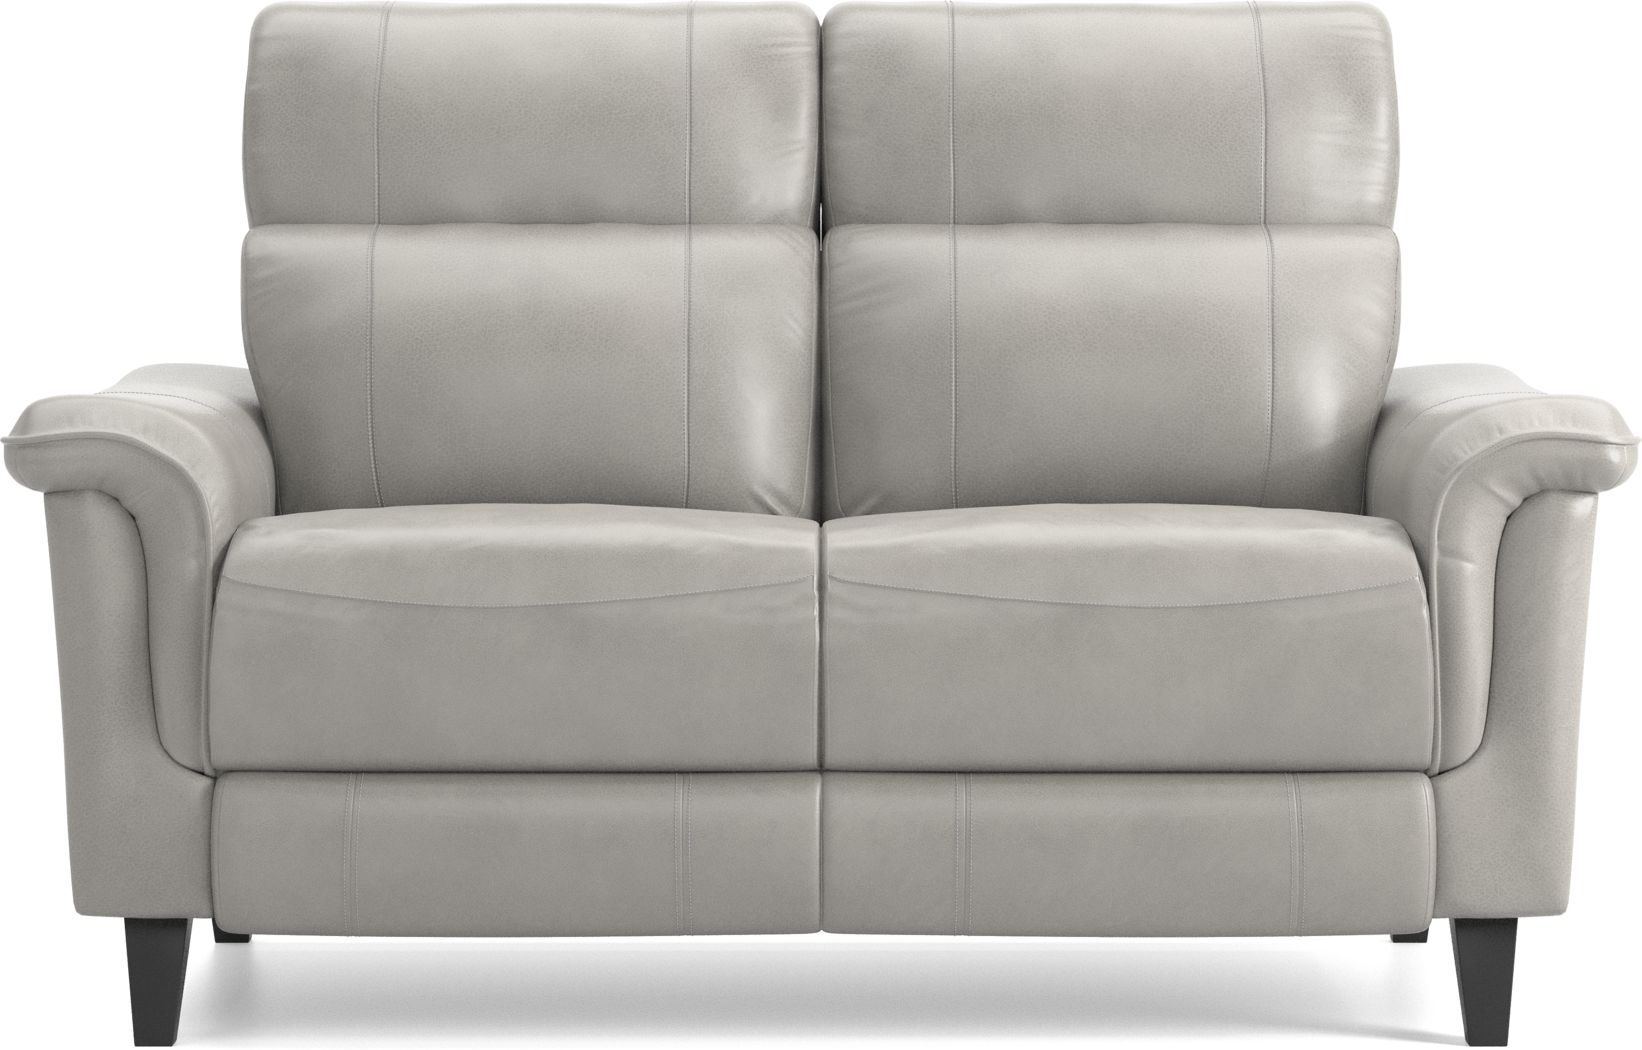 Small Leather Recliner Sofas Couches, Compact Leather Recliner